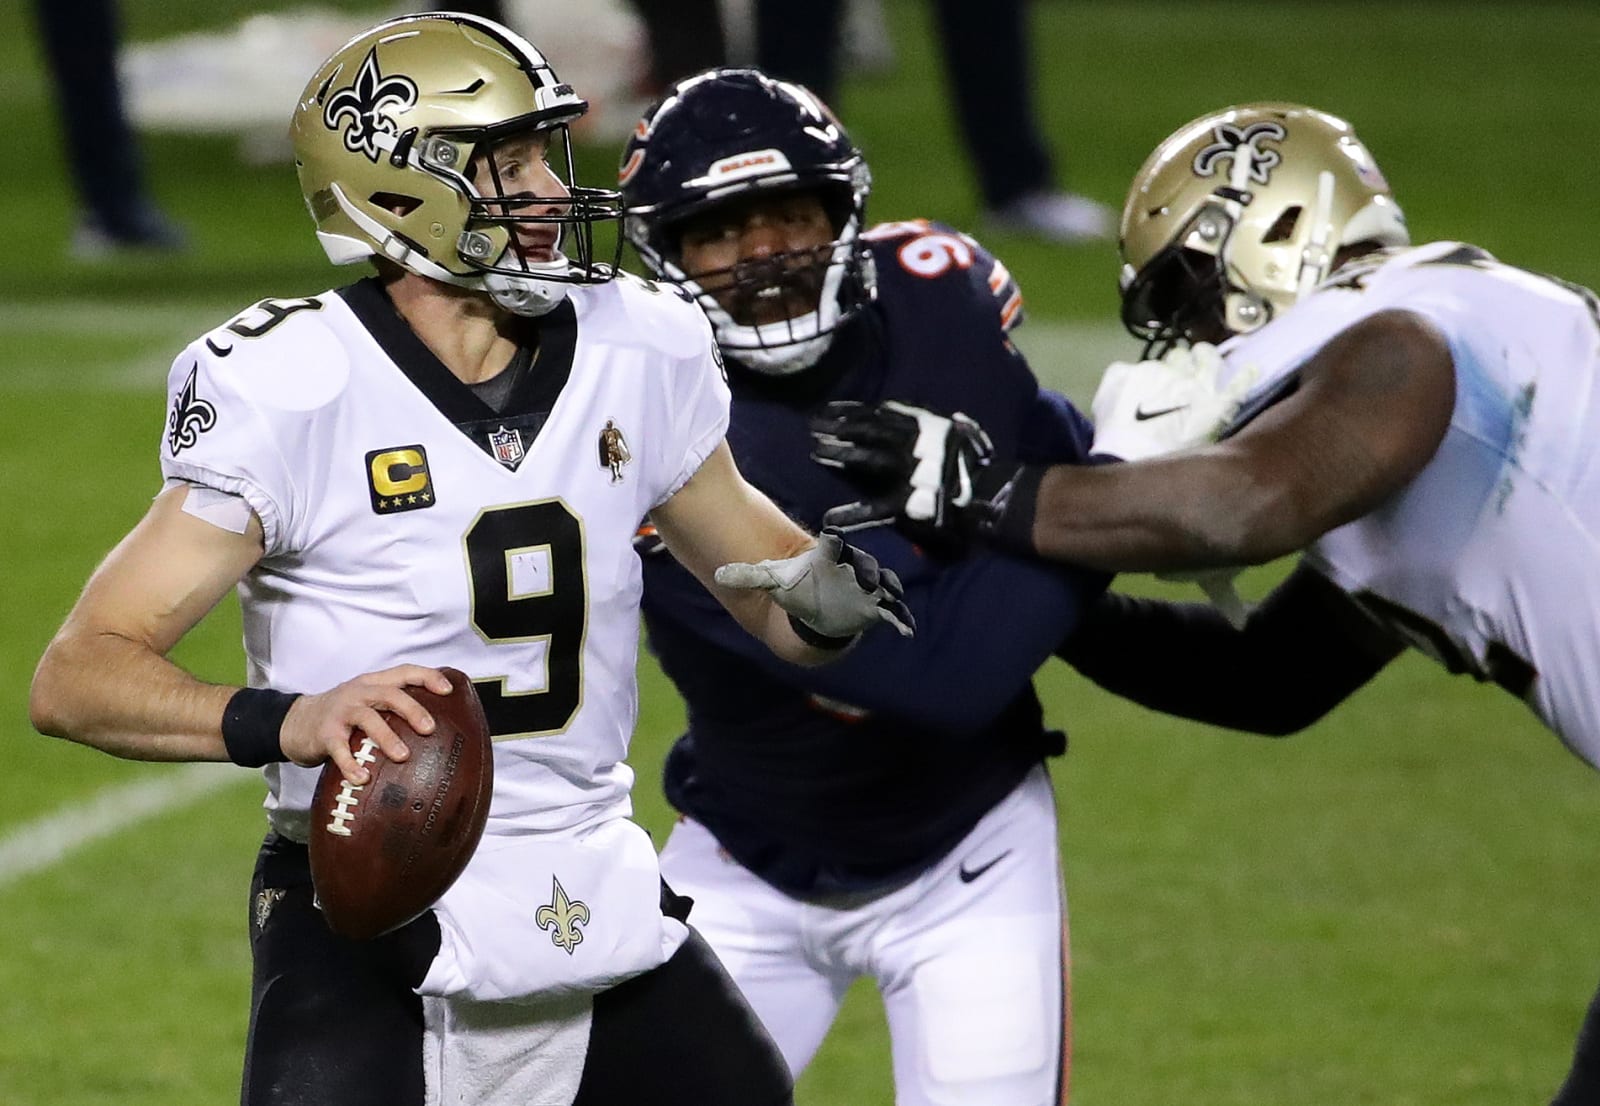 Saints vs. Bears 3 bigtime takeaways from New Orleans overtime victory